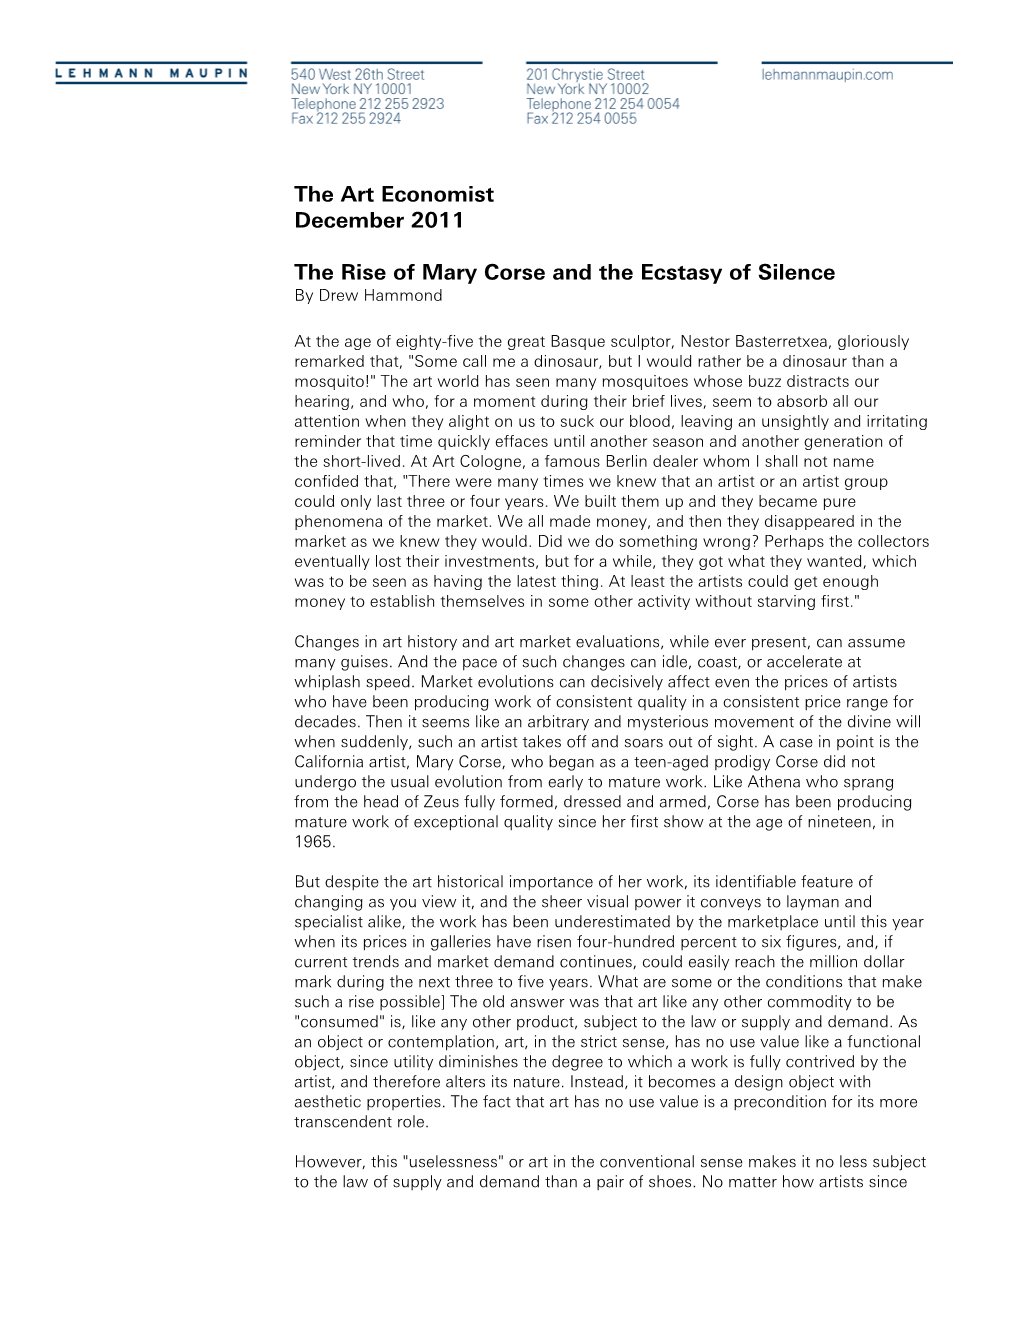 The Art Economist December 2011 the Rise of Mary Corse and The